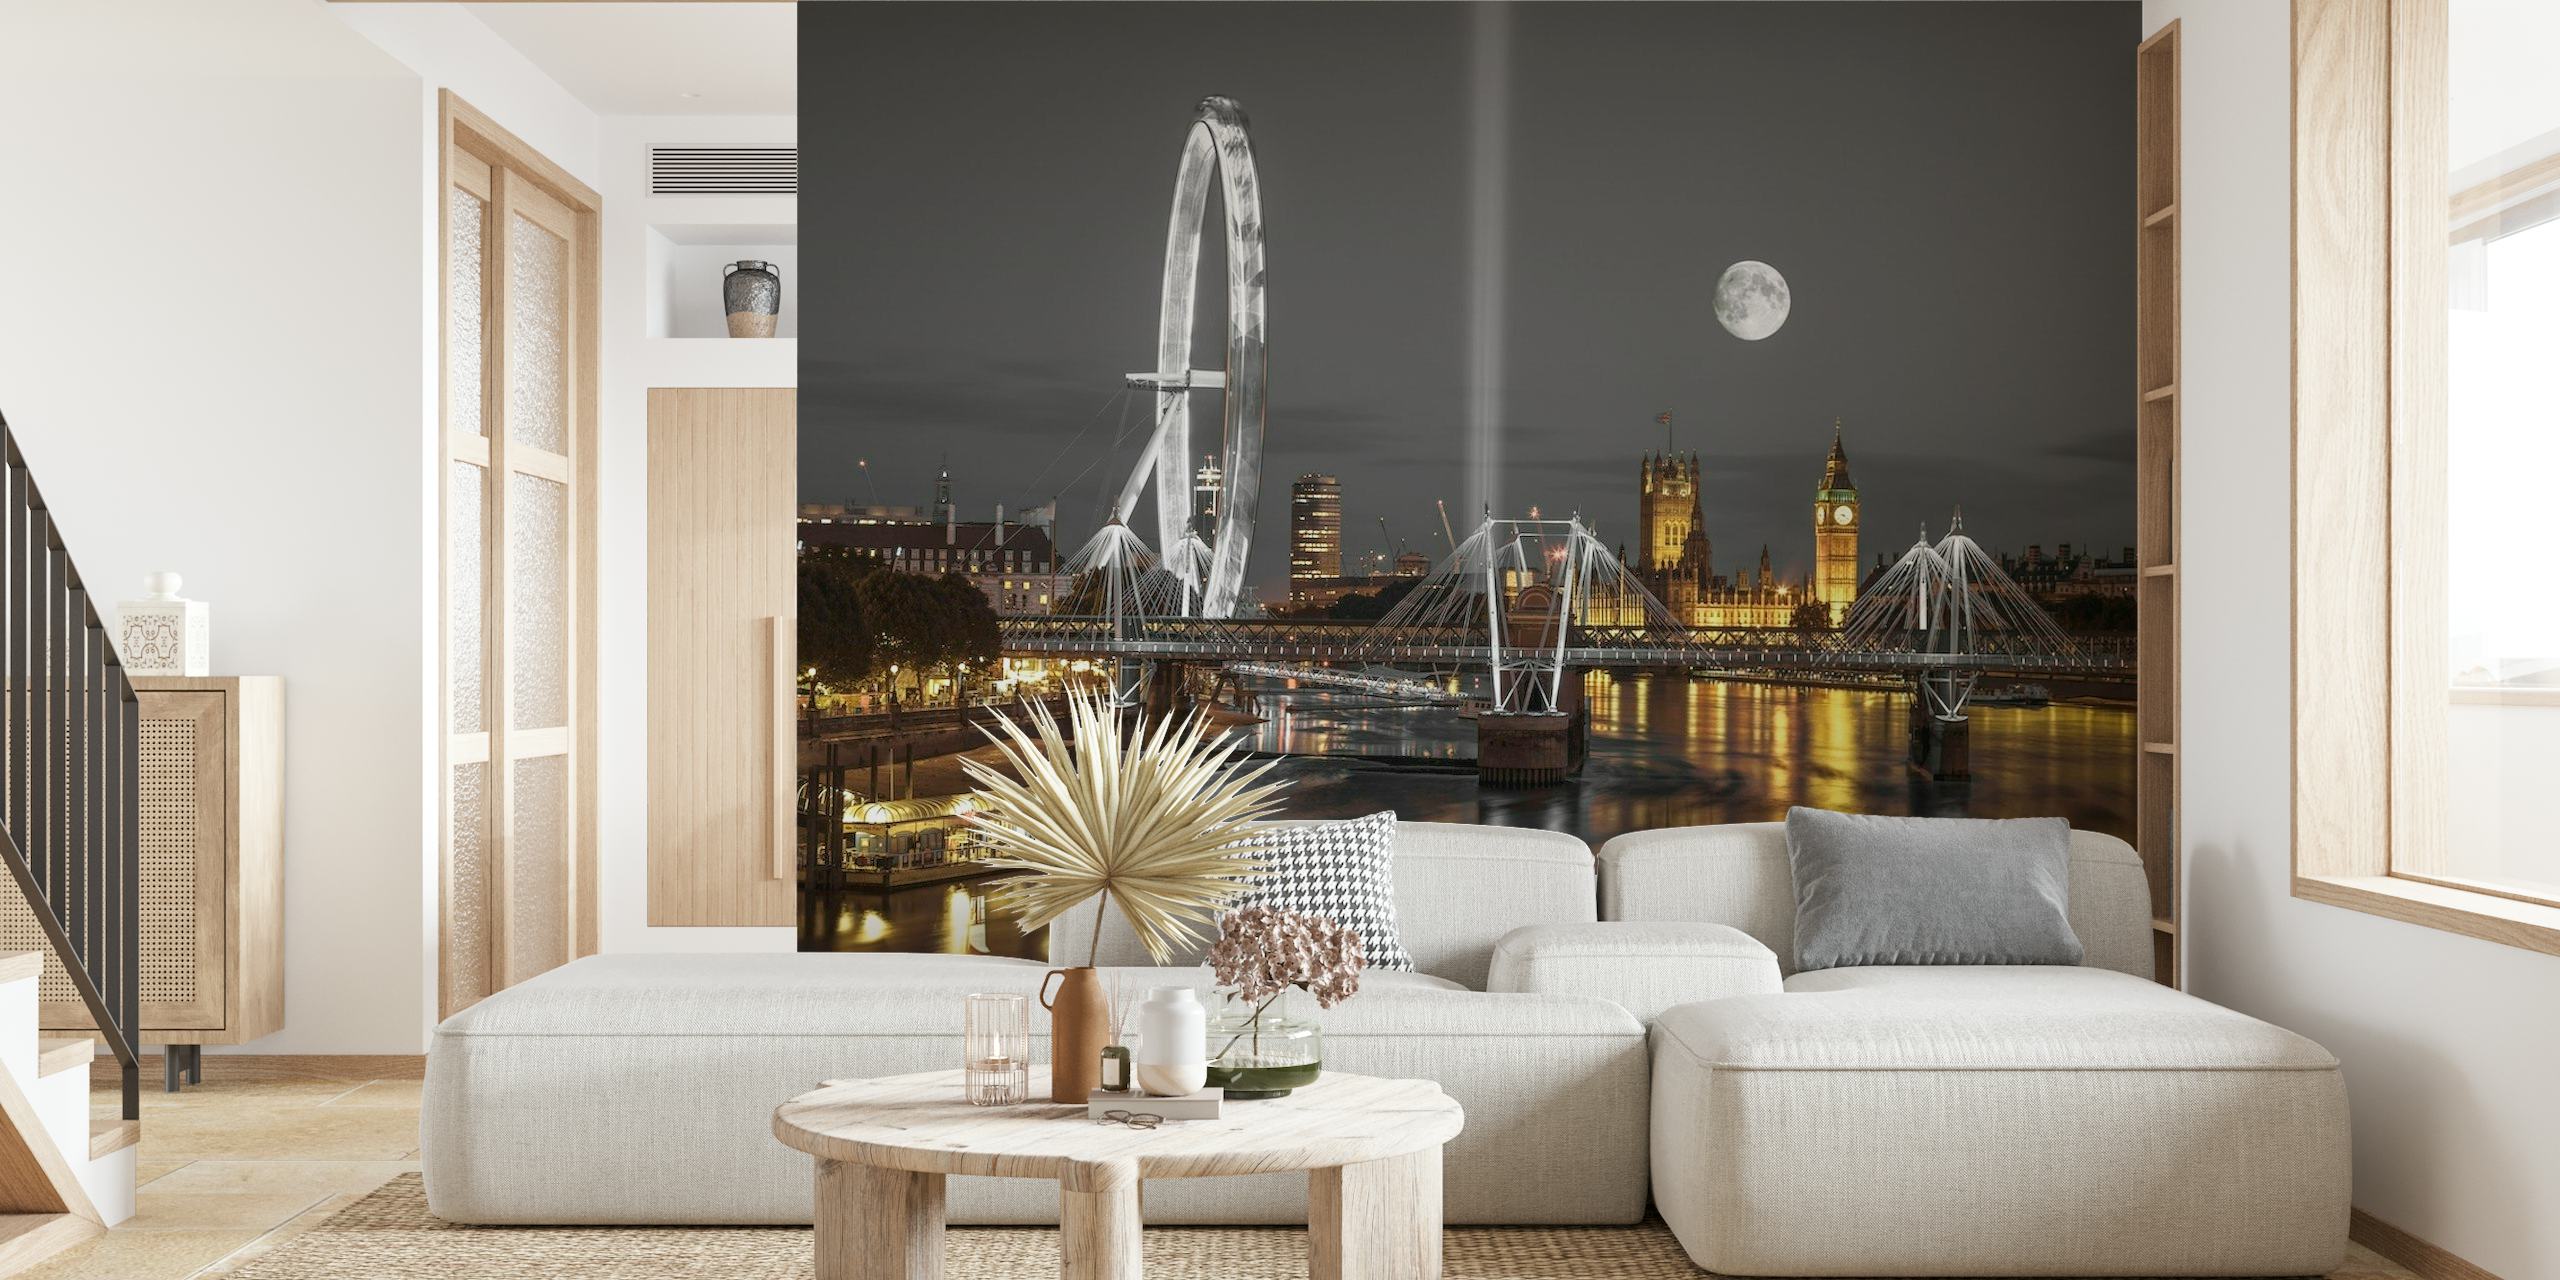 British landmarks wall mural with London Eye and Palace of Westminster under a moonlit sky